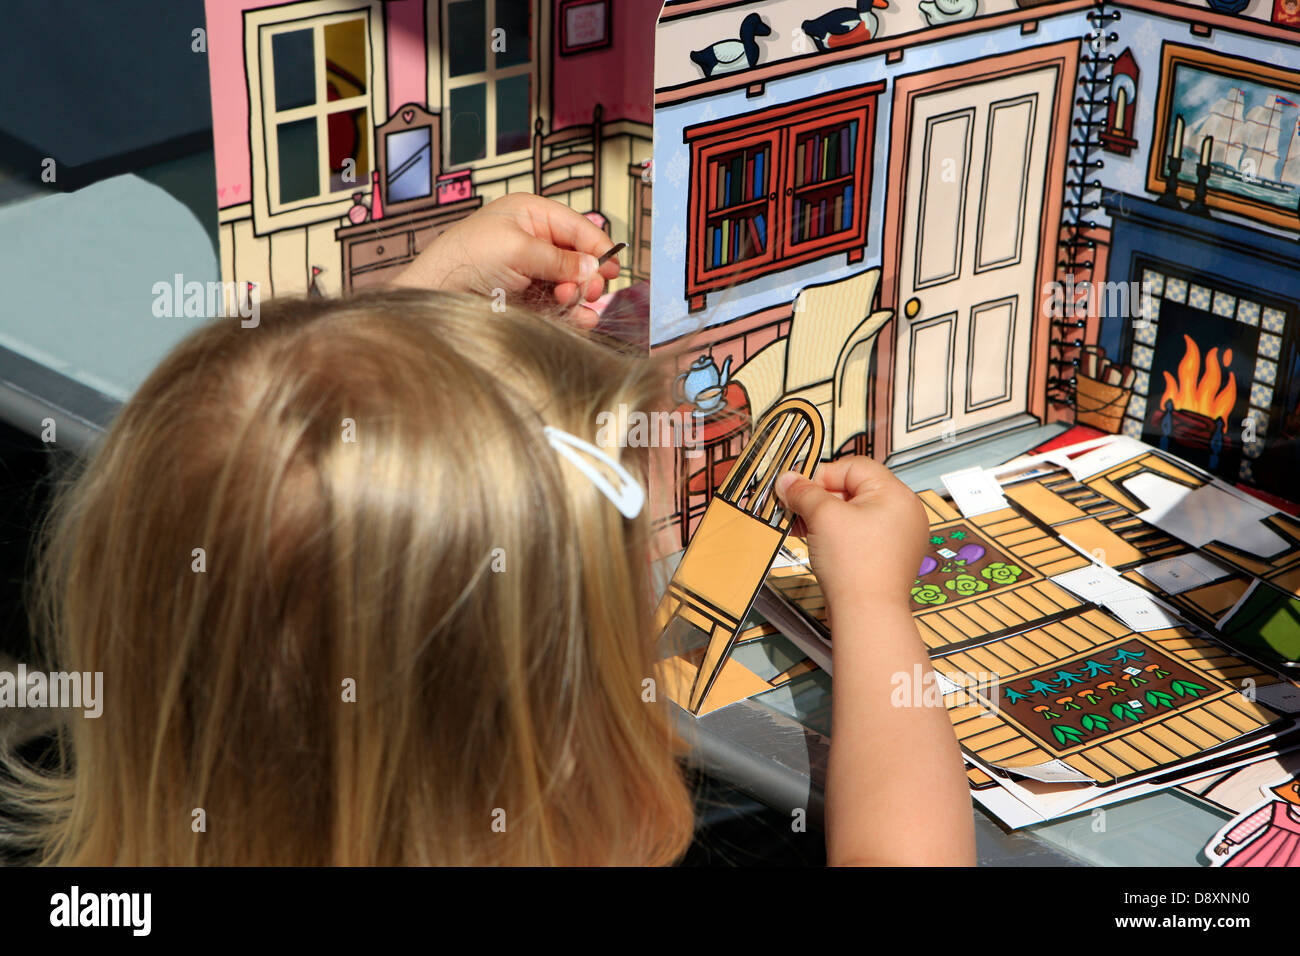 Blond haired girl playing with a doll's house pop up book Stock Photo